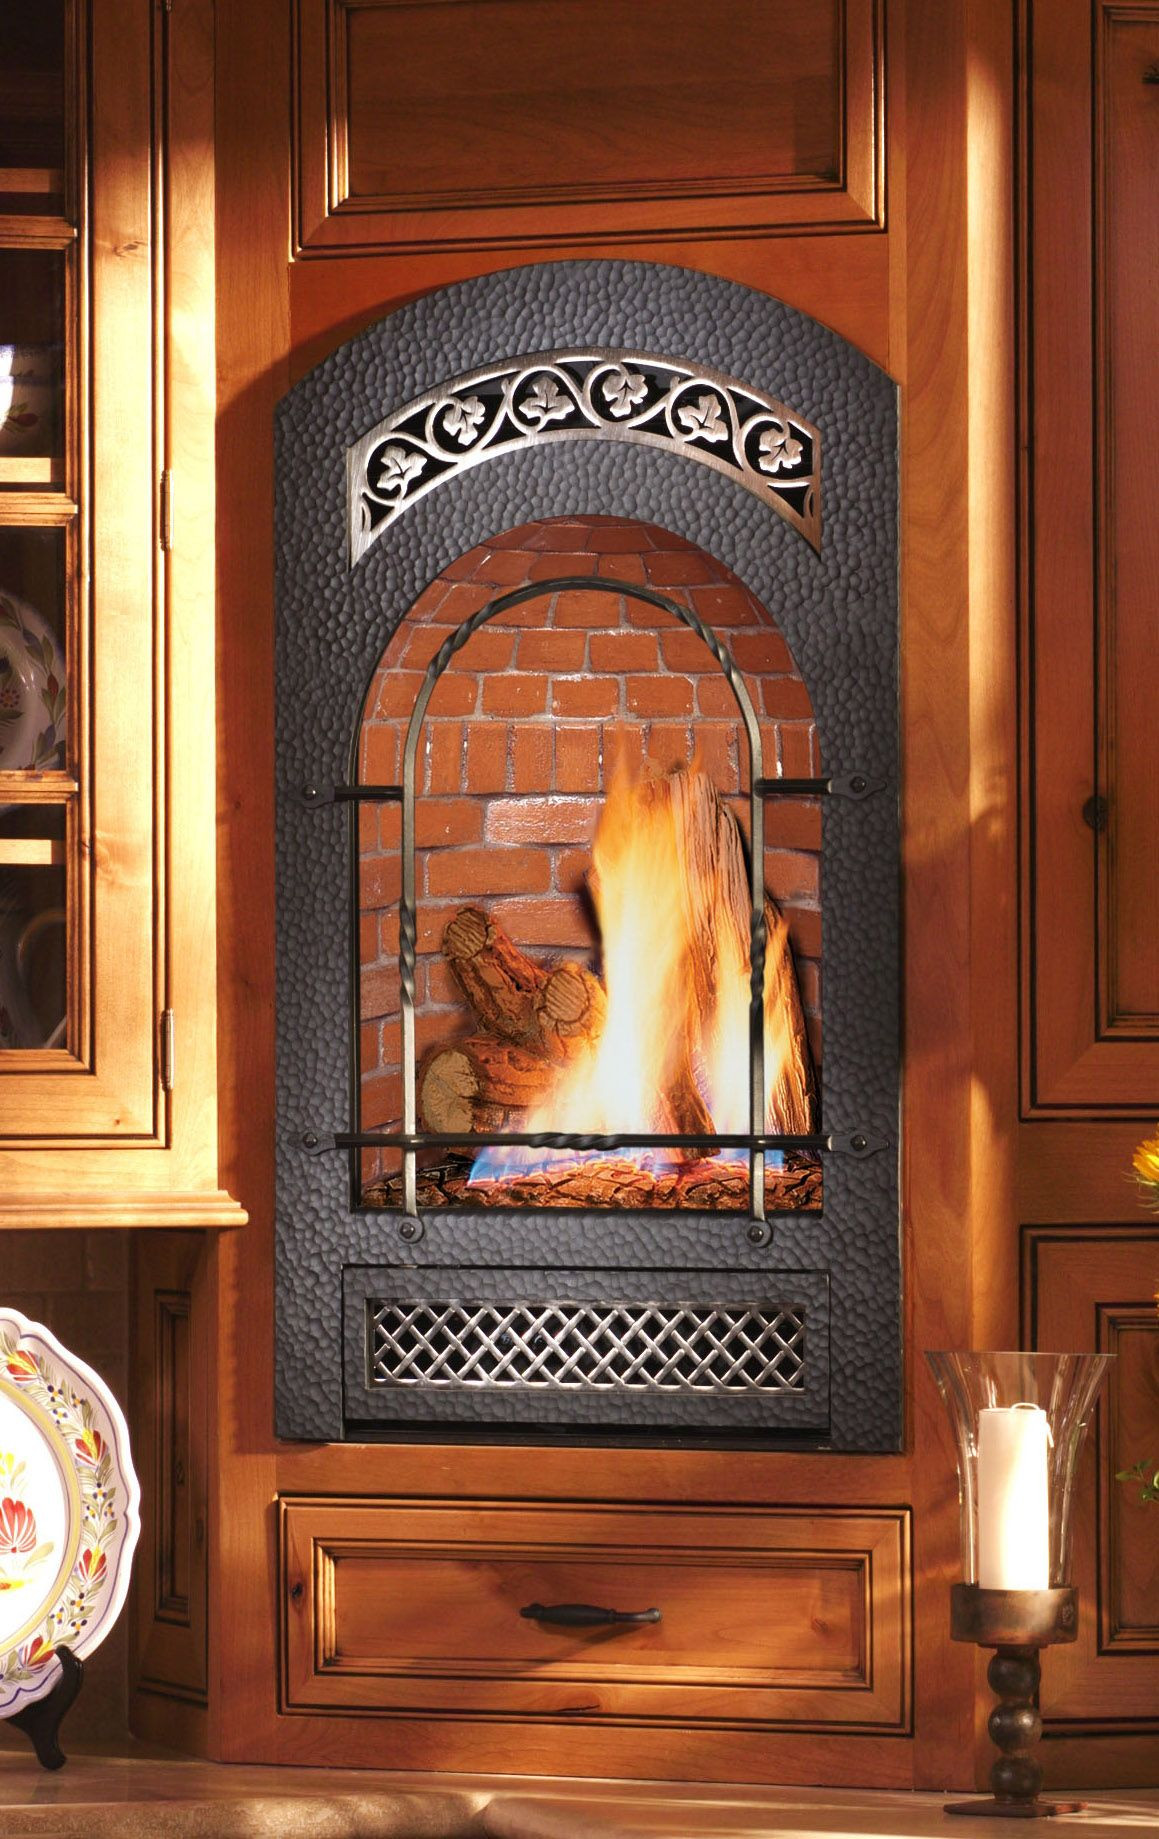 Small Gas Fireplace For Bedroom
 Small wall mounted gas fireplace Great for bedrooms